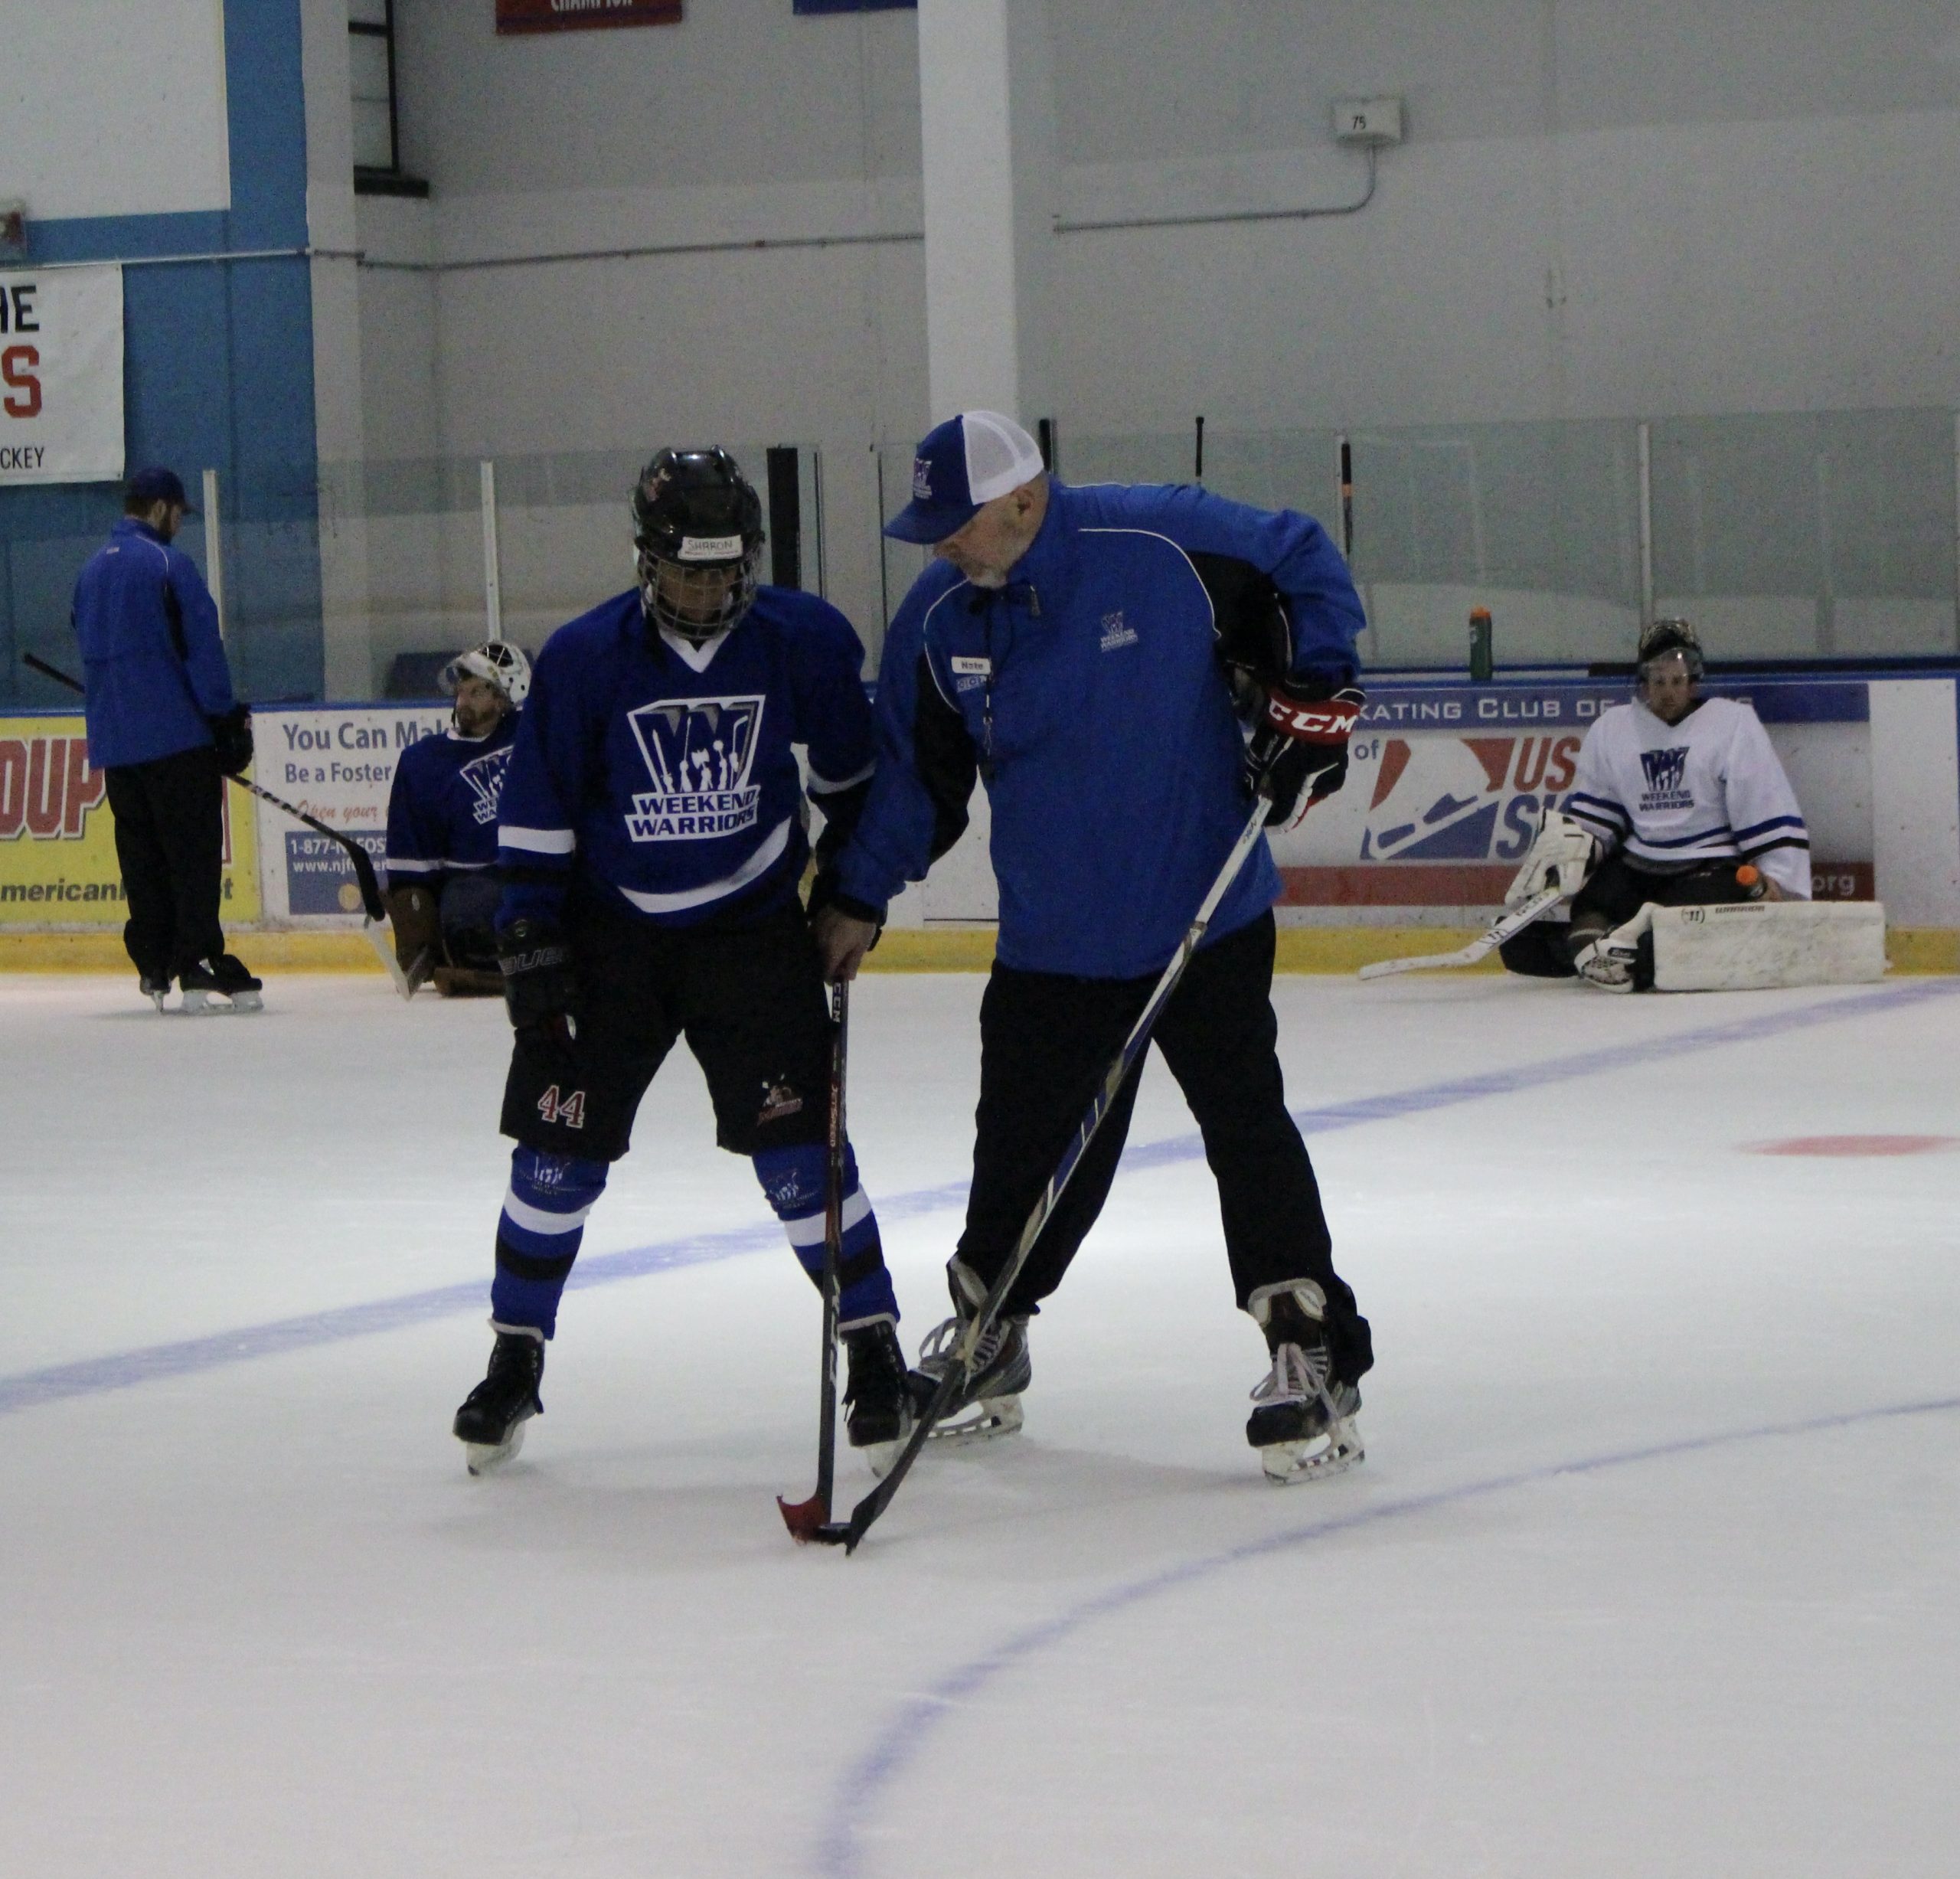 Coach Justin helps a player feel his edges